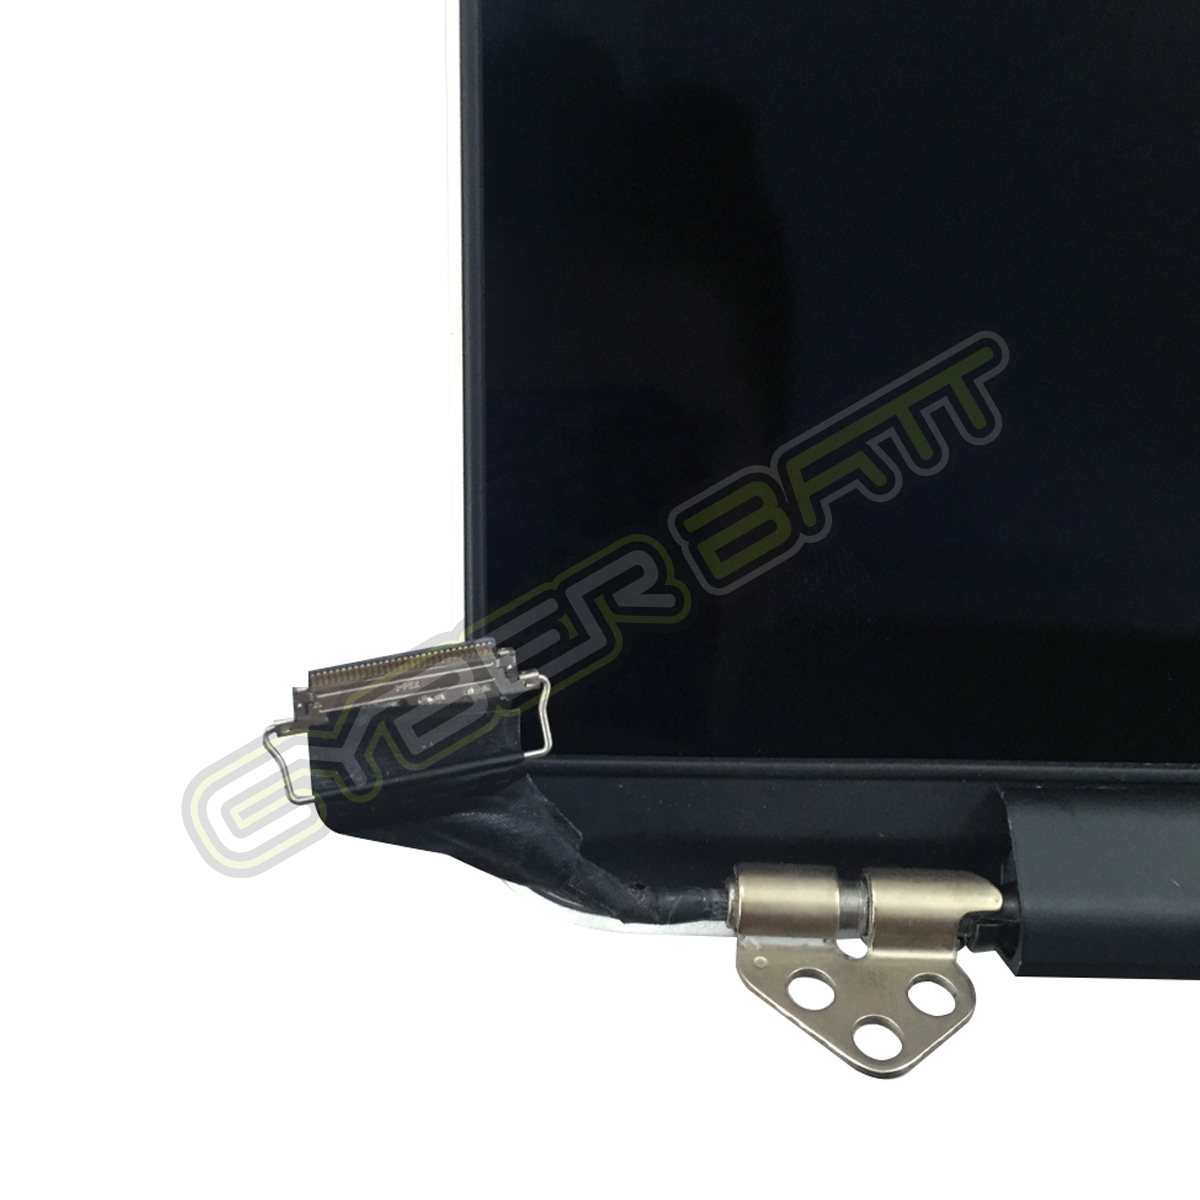 LCD Assembly MacBook Pro Retina 13 A1502 Early 2015